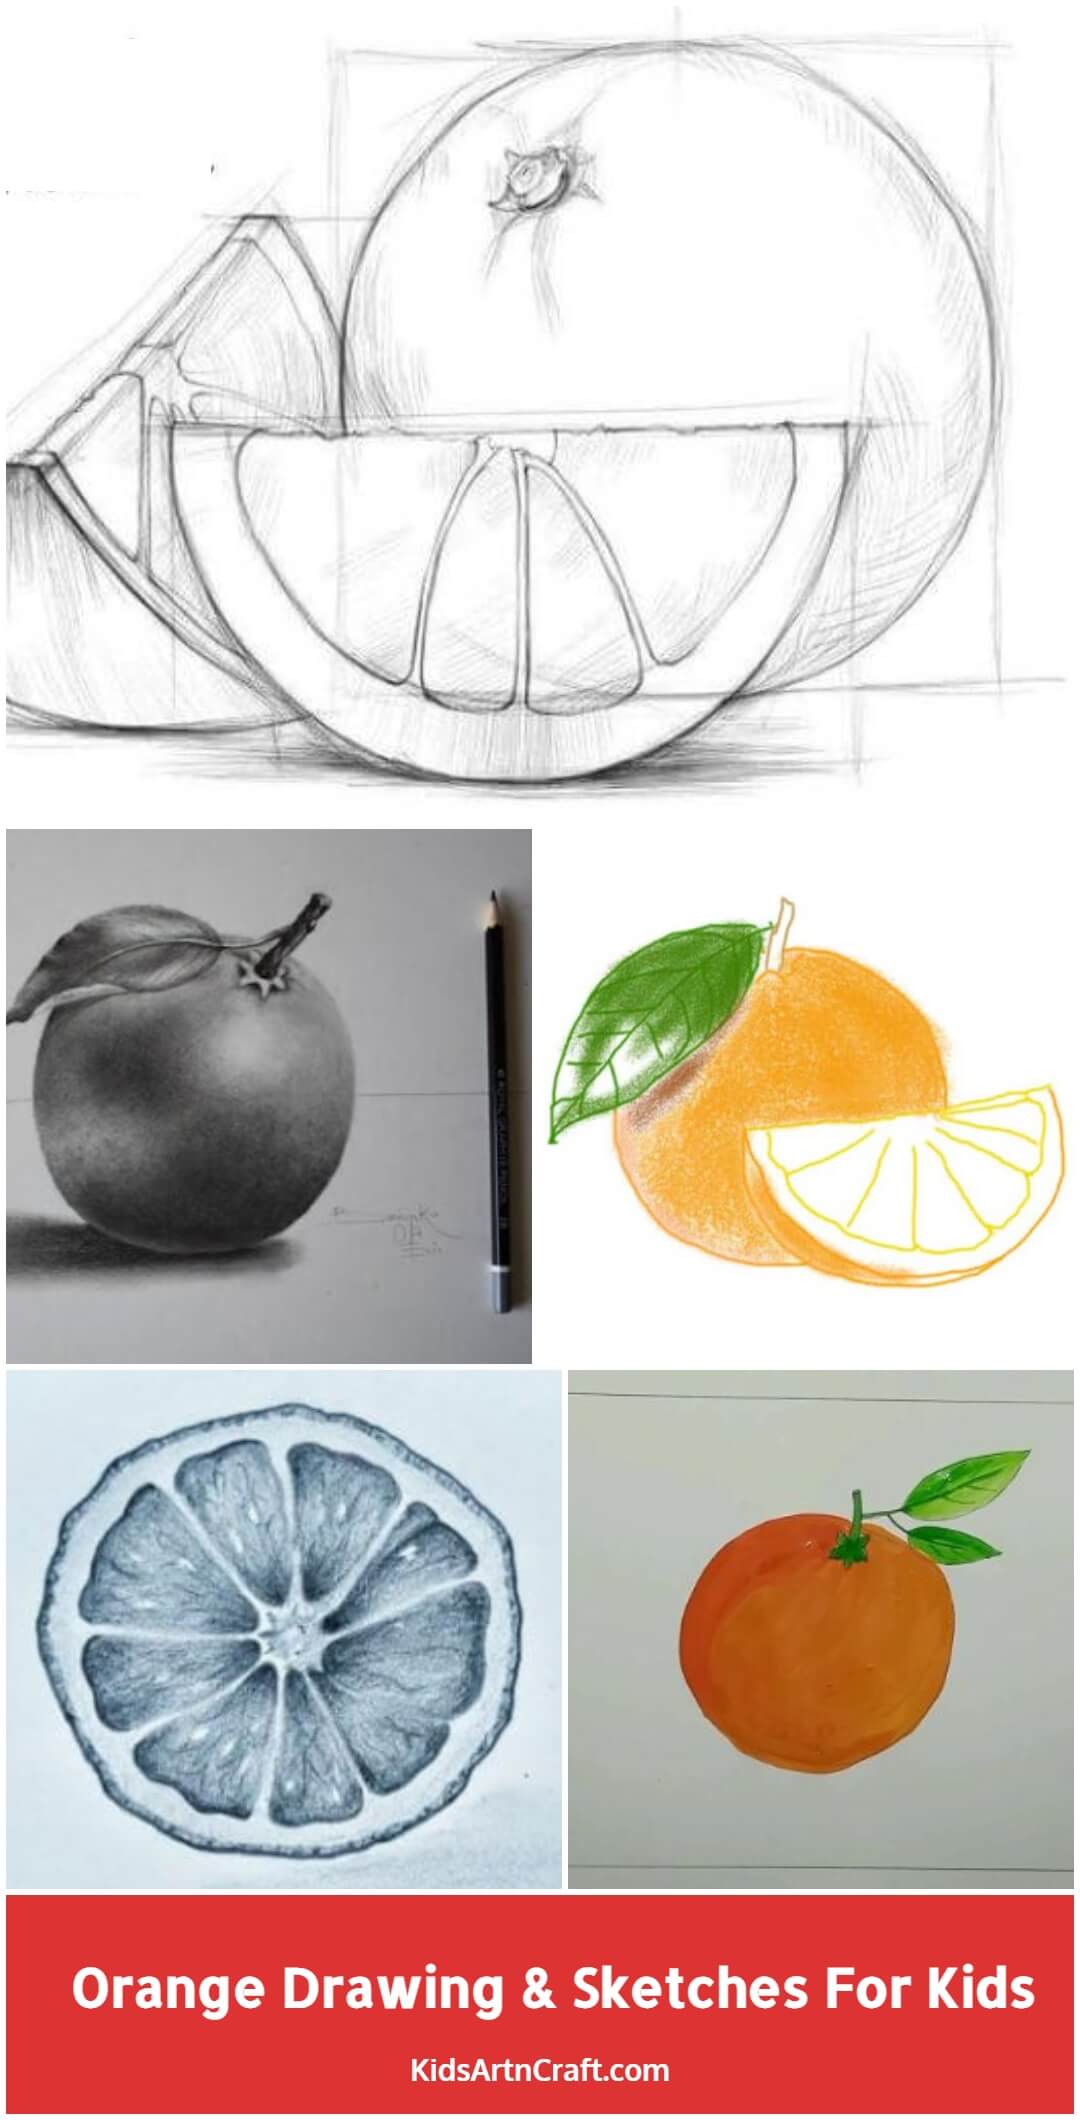 Orange fruit drawing illustration by hand drawn line art. | CanStock